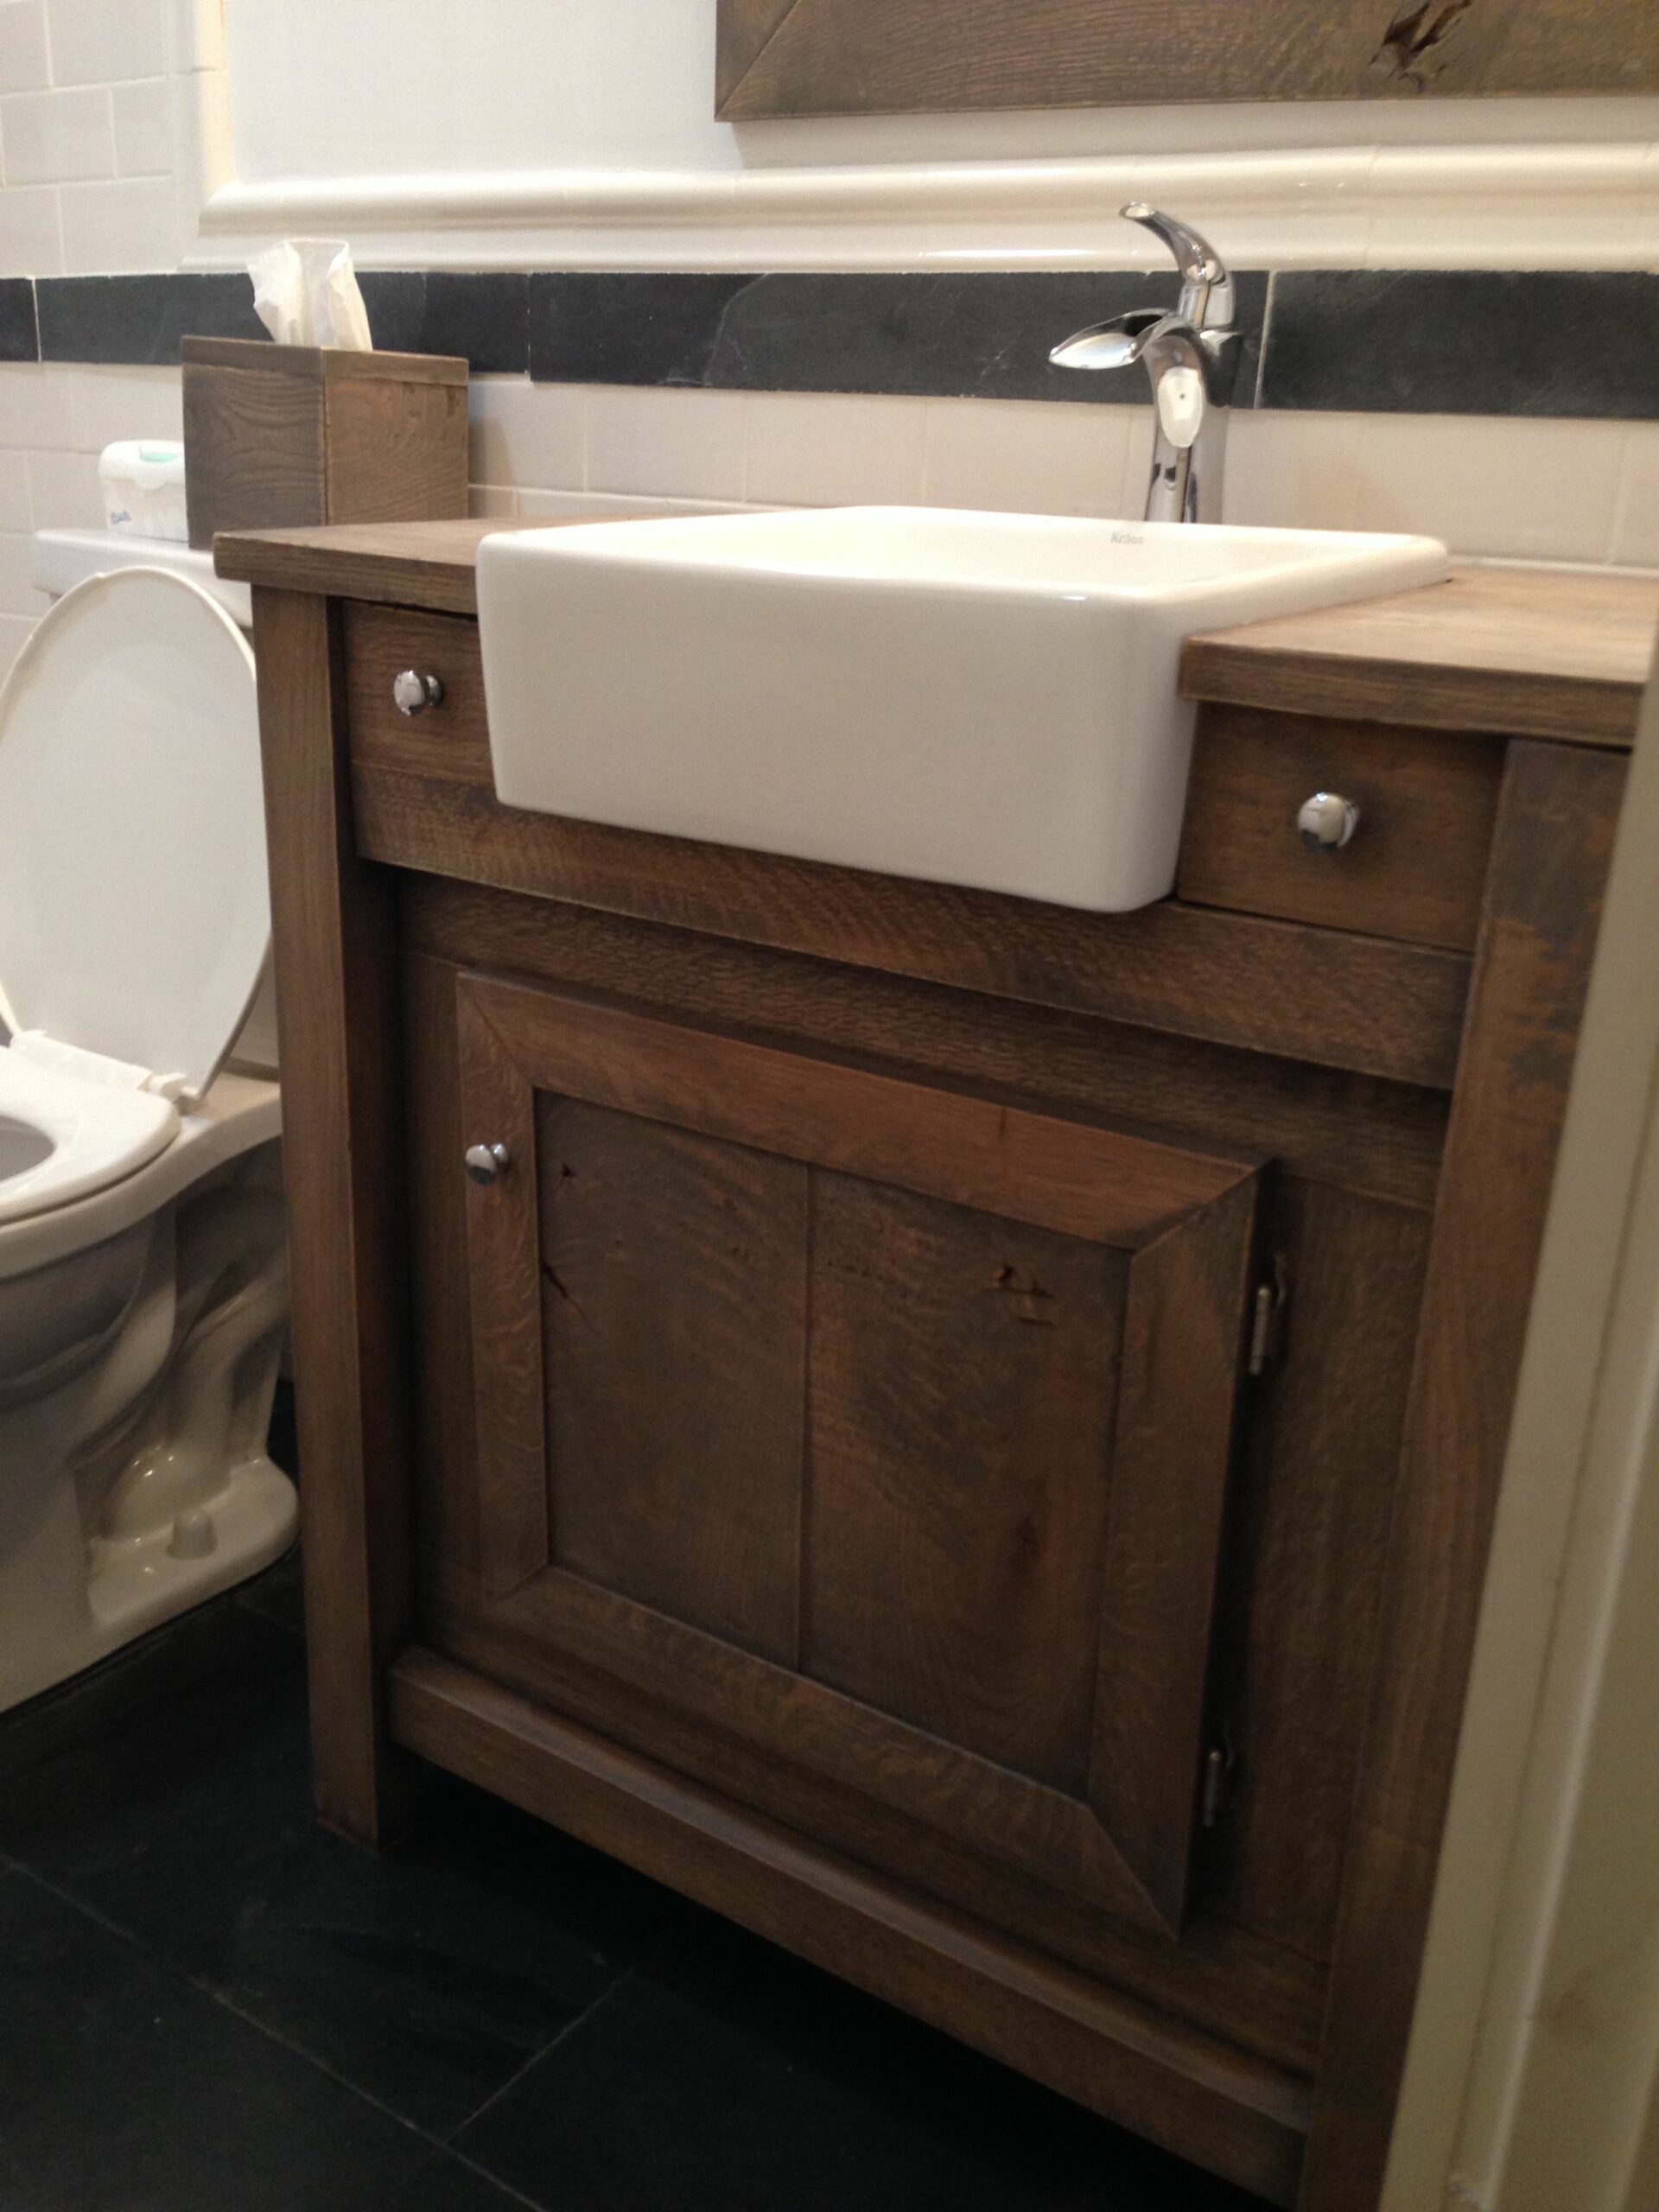 toilet sink with cupboard Bathroom sink with cabinet – homesfeed